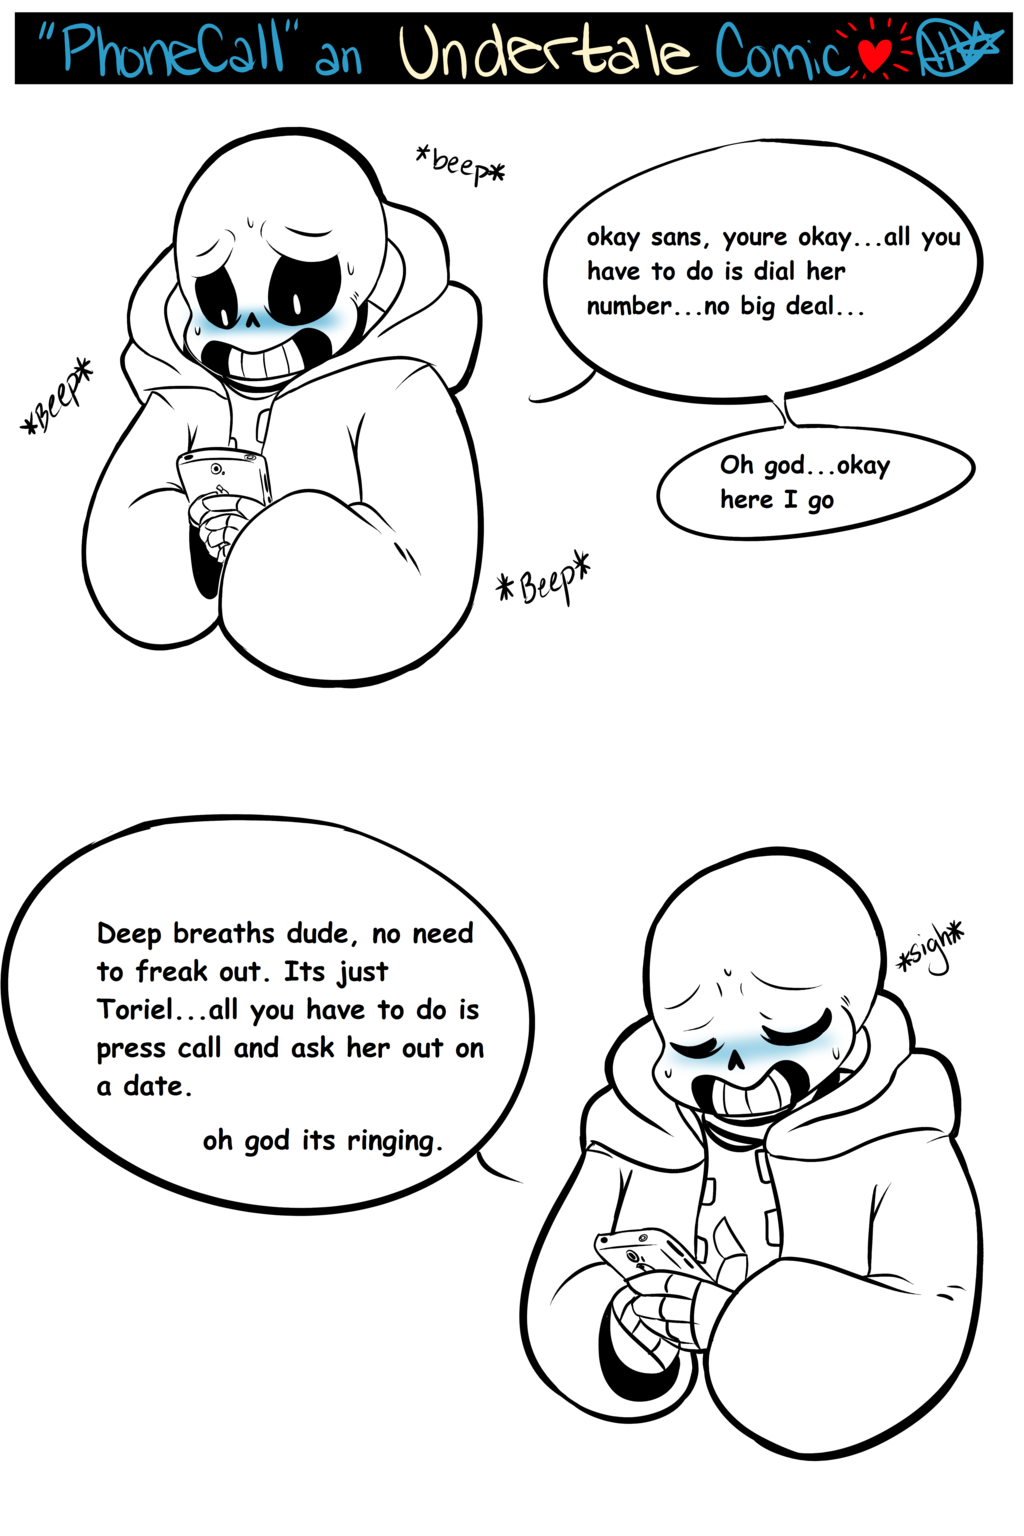 Undertale Phone call Comic 1 of 2 by SilverBoy27 on